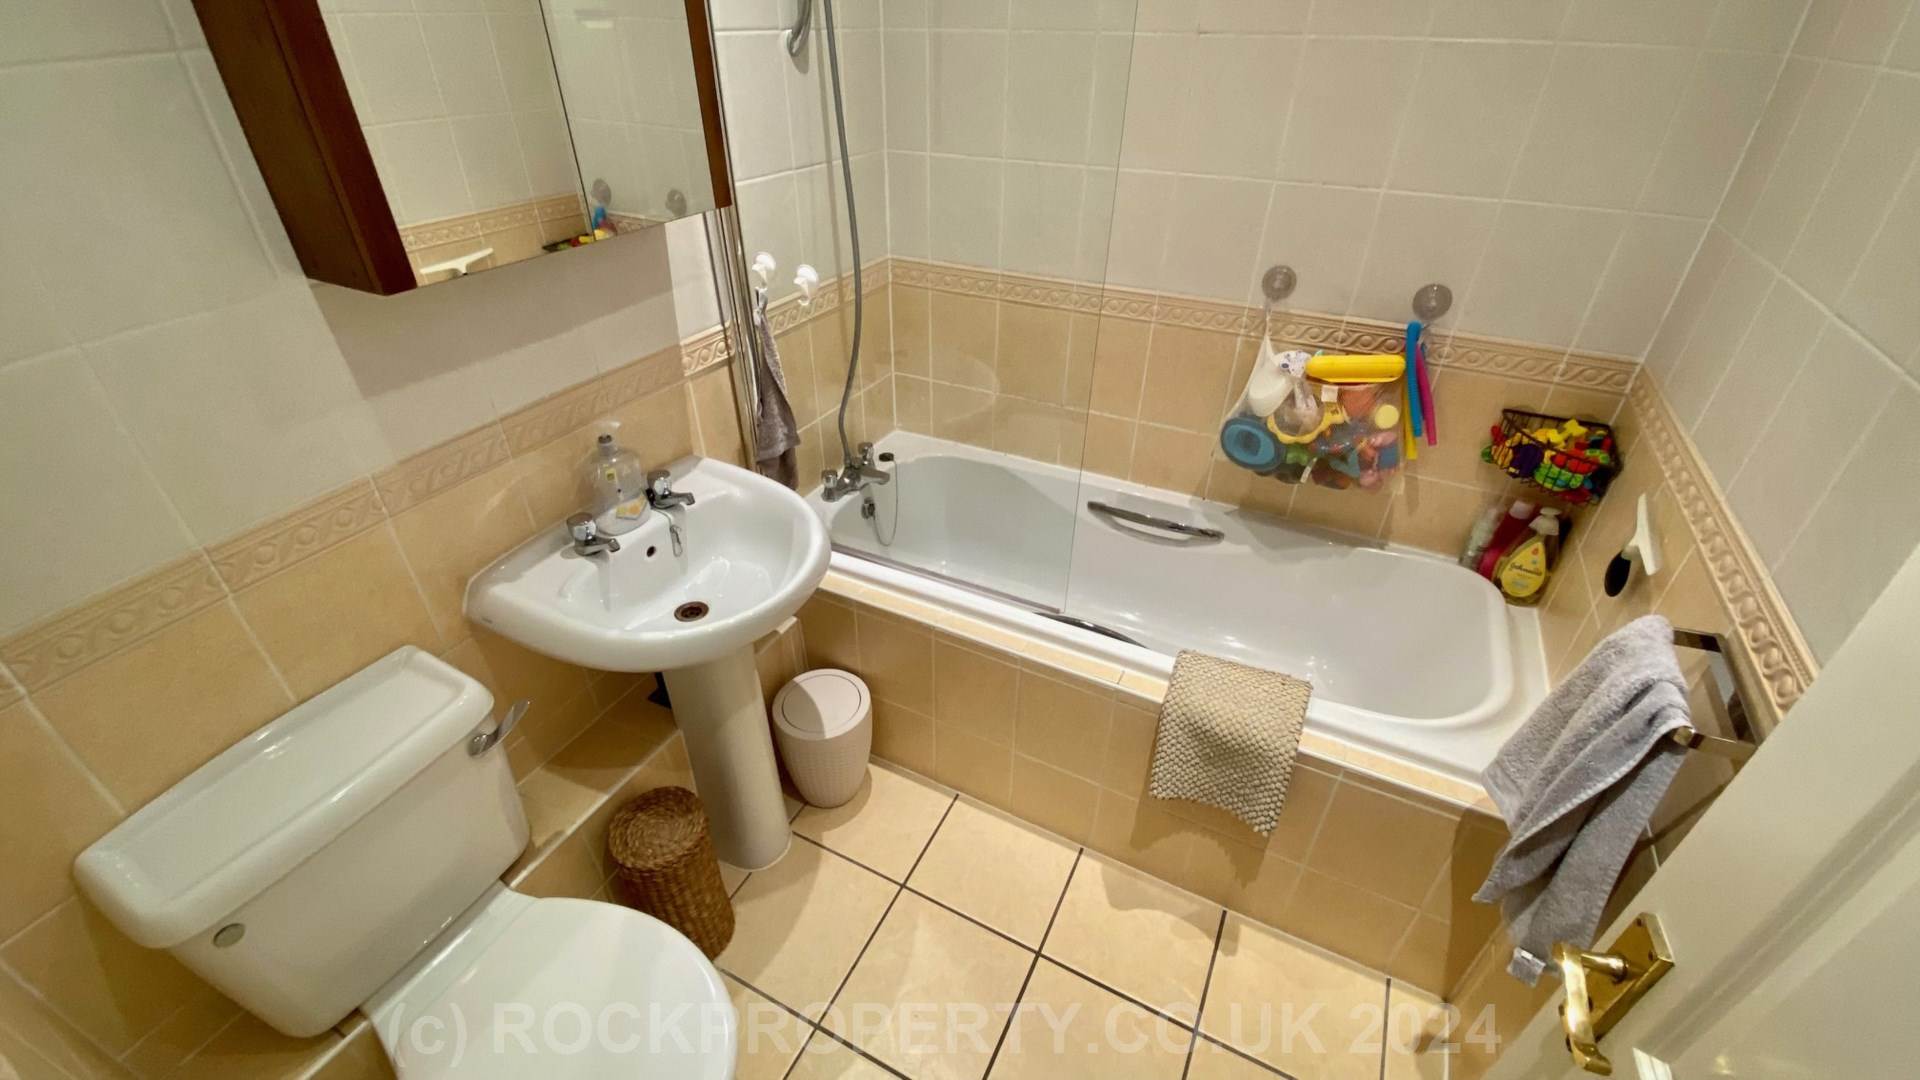 SPACIOUS 2 BED + BALCONY, Woodville Apartments, St Saviour's Road, Image 17